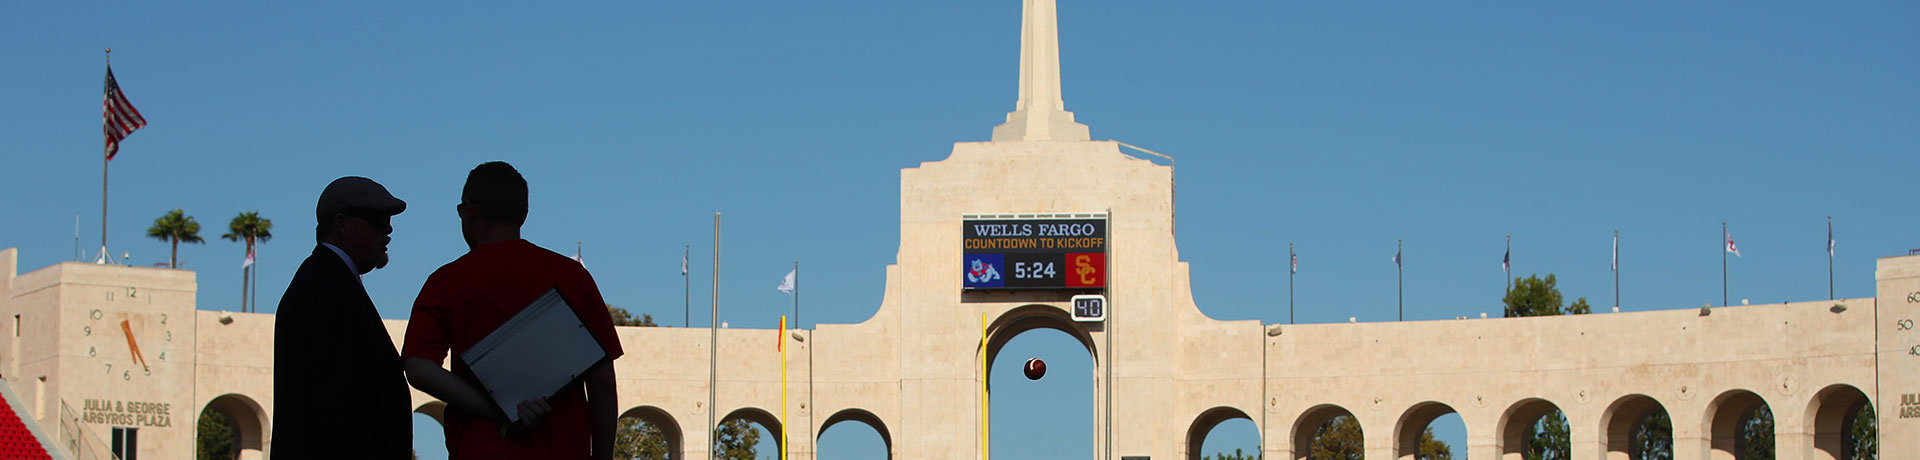 Stadium tower with countdown to kick off Fresno State vs USC